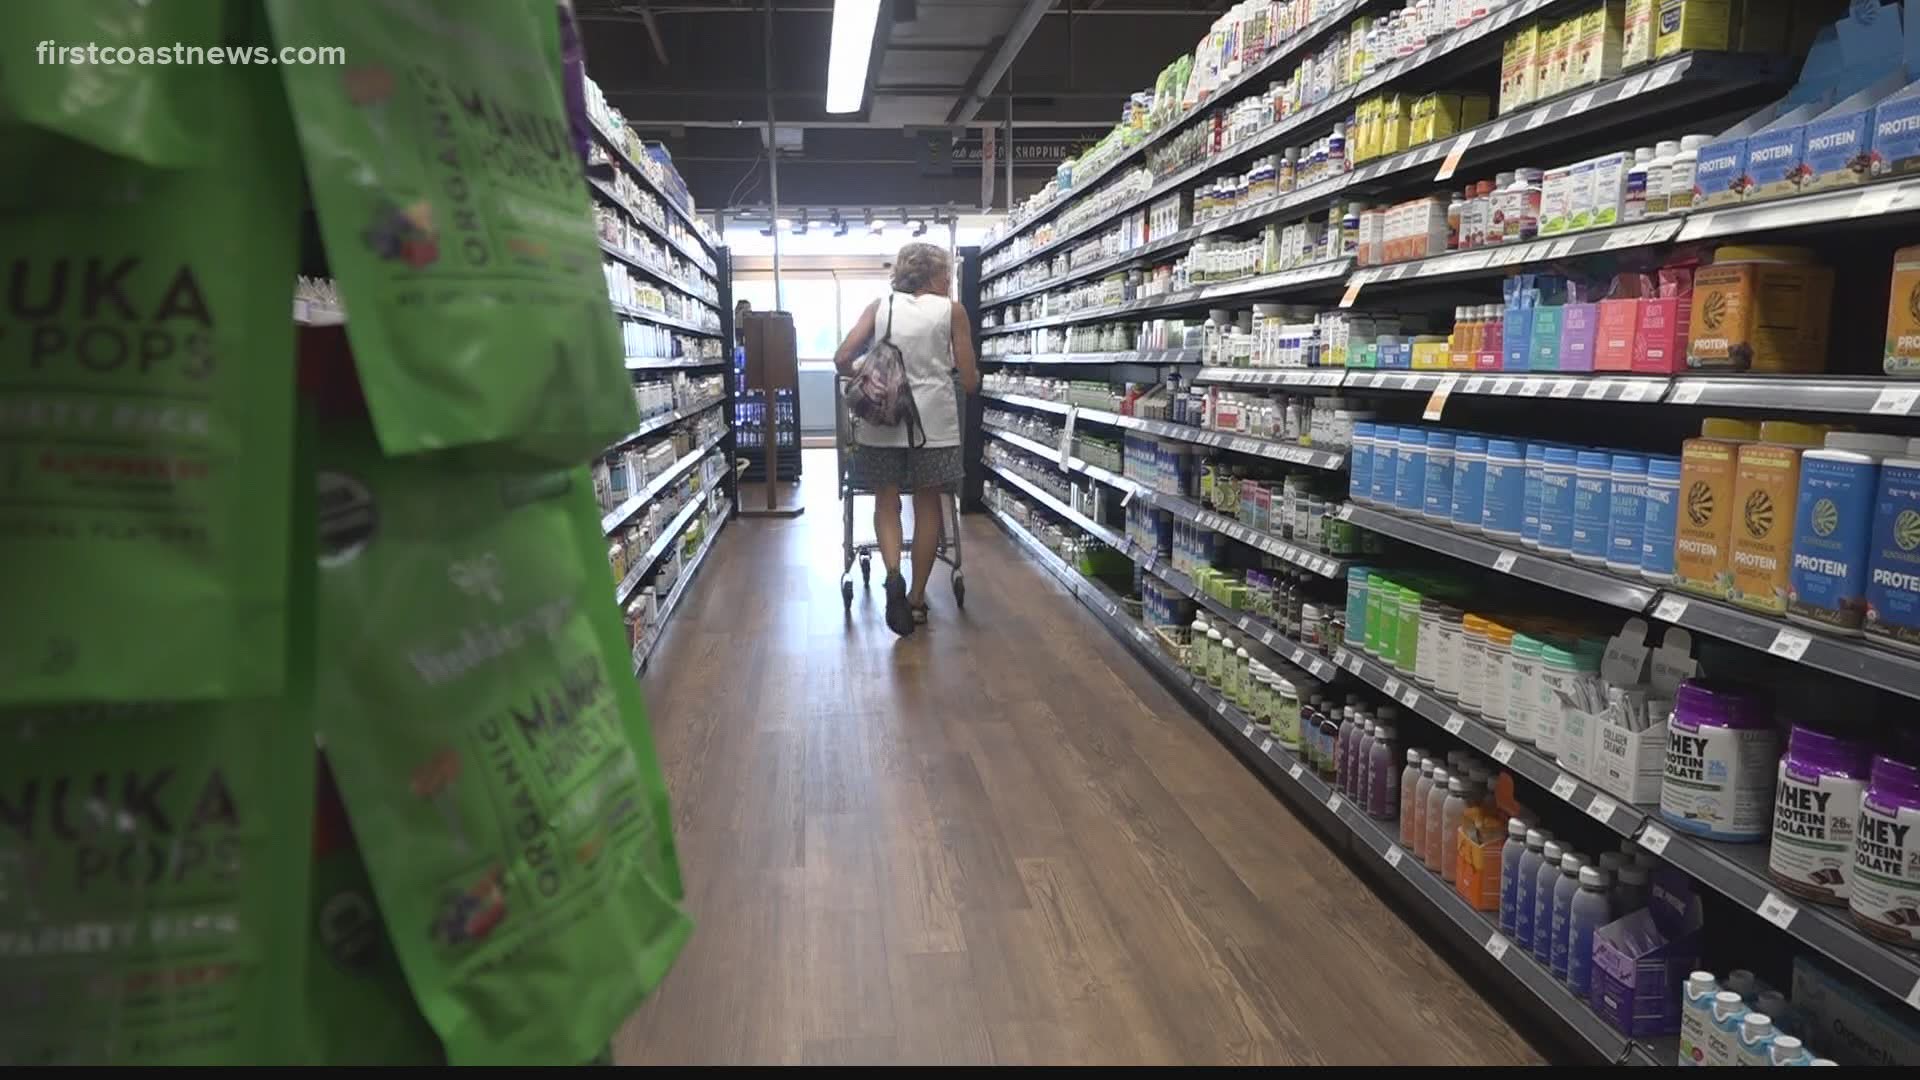 Some stores have changed their policies to prevent hoarding and contamination. Places you could usually return any item and get a refund are temporarily saying no.